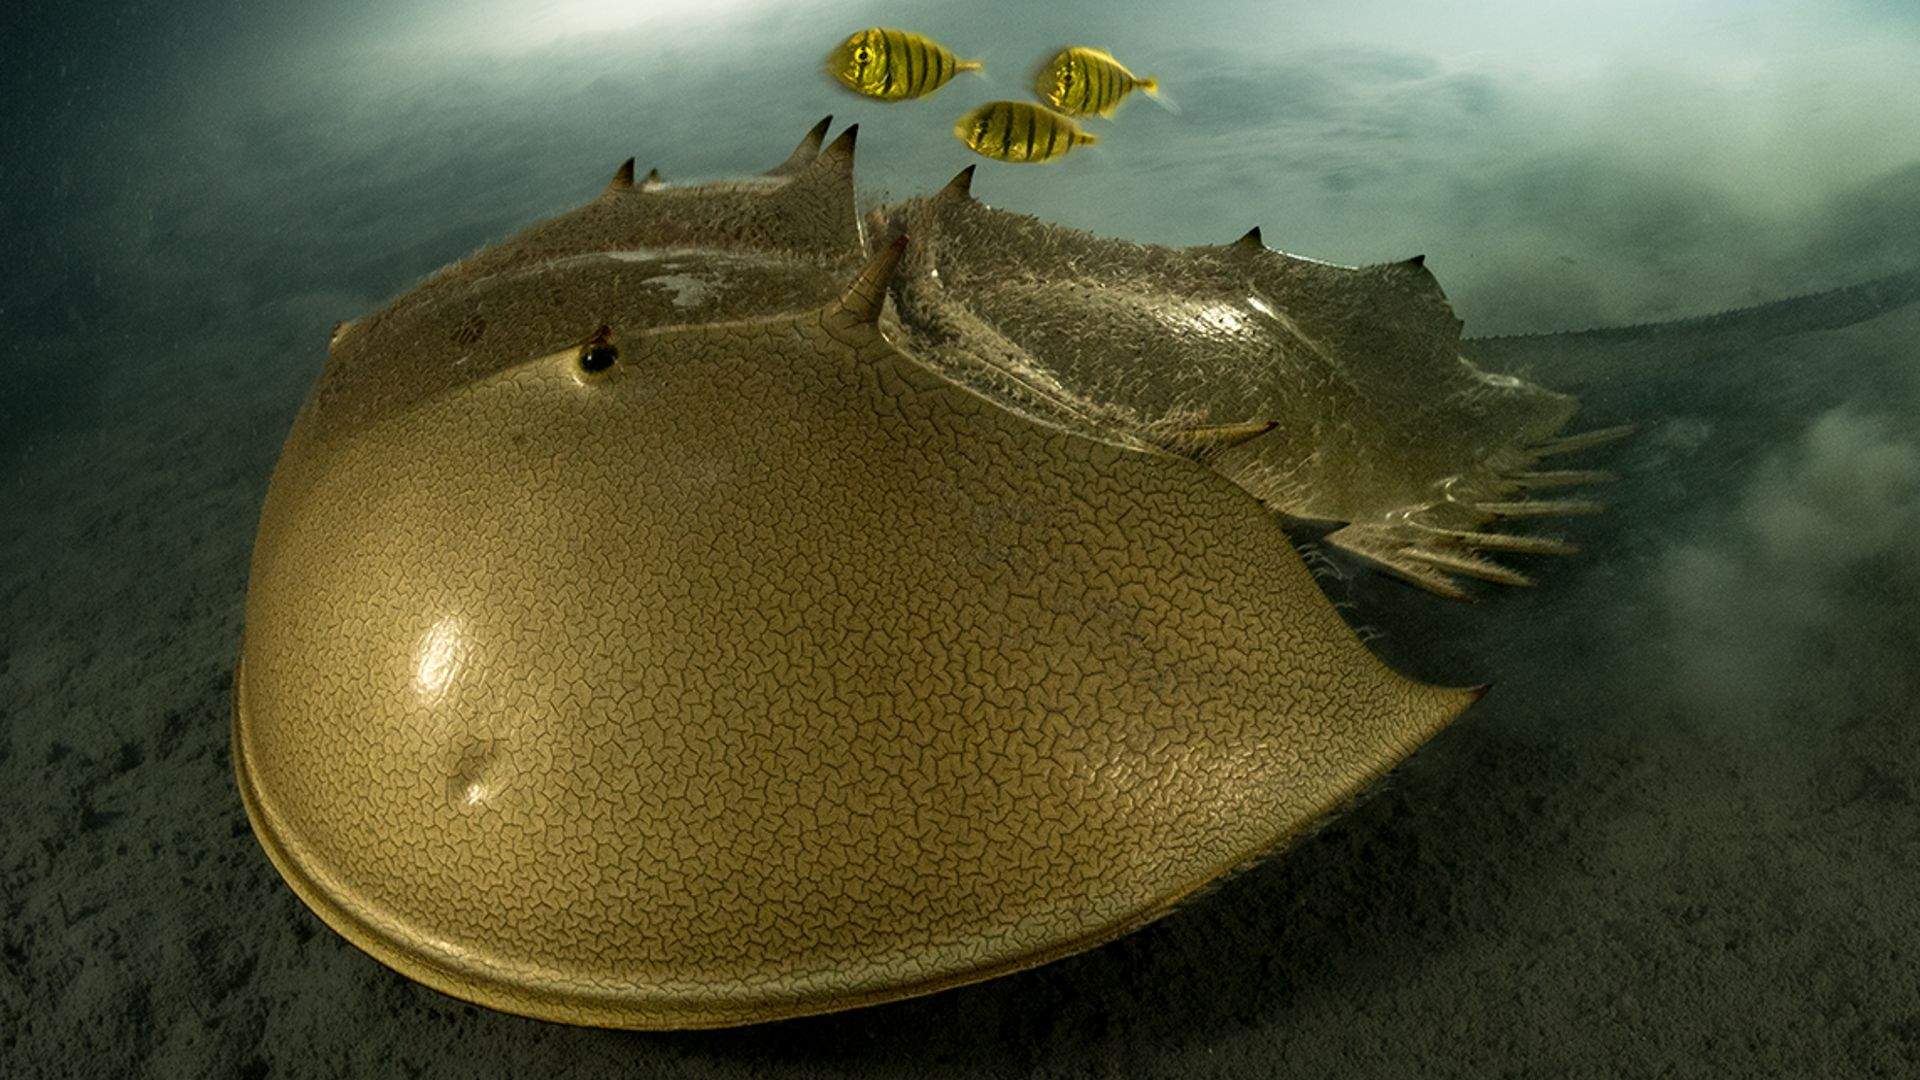 A hauntingly beautiful underwater photograph of a highly-endangered tri-spine horseshoe crab accompanied by a trio of Golden Trevally fish with black stripes. The photograph is named The Golden Horseshoe and was taken by French underwater photographer and marine biologist Laurent Ballesta.